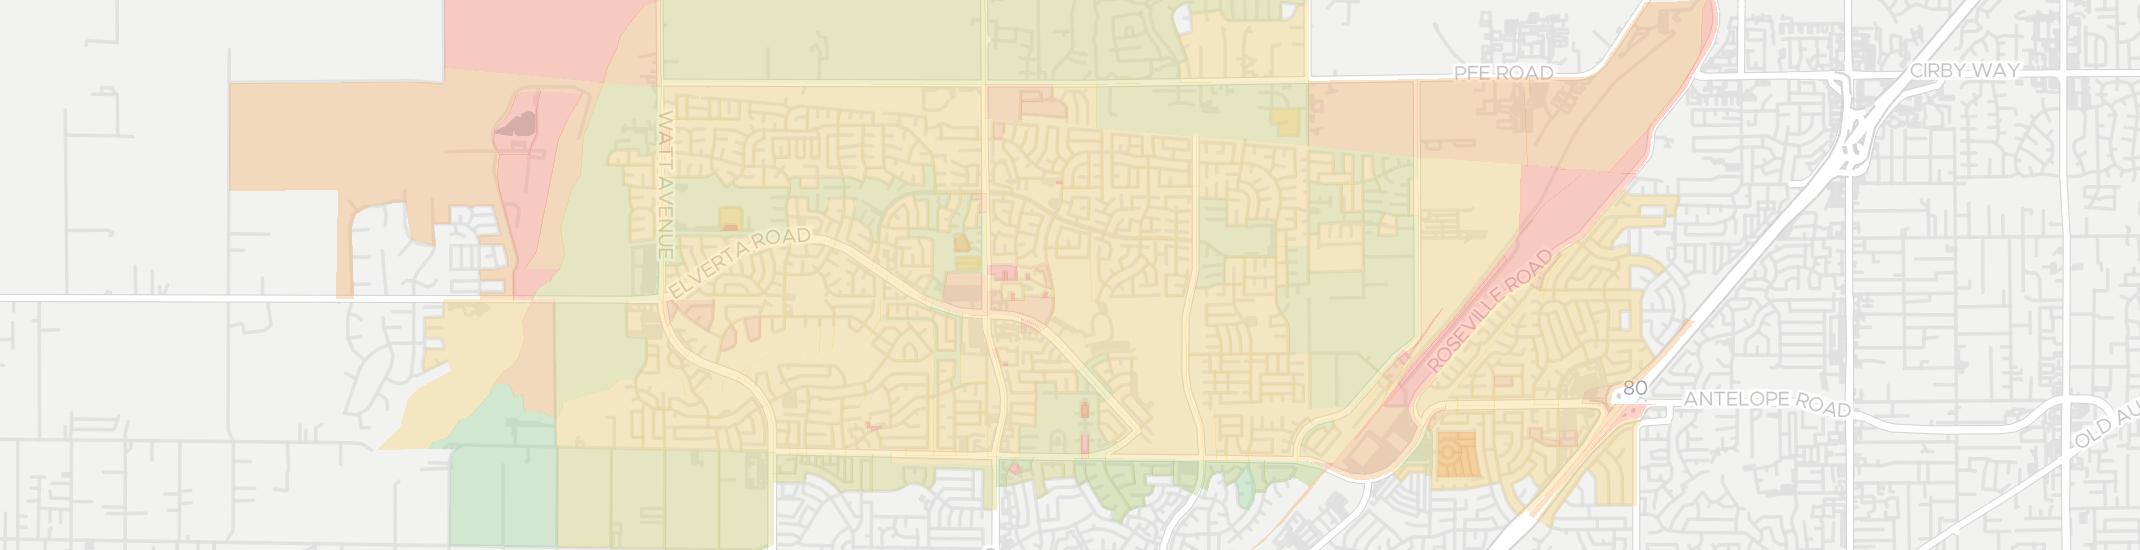 Antelope Internet Competition Map. Click for interactive map.